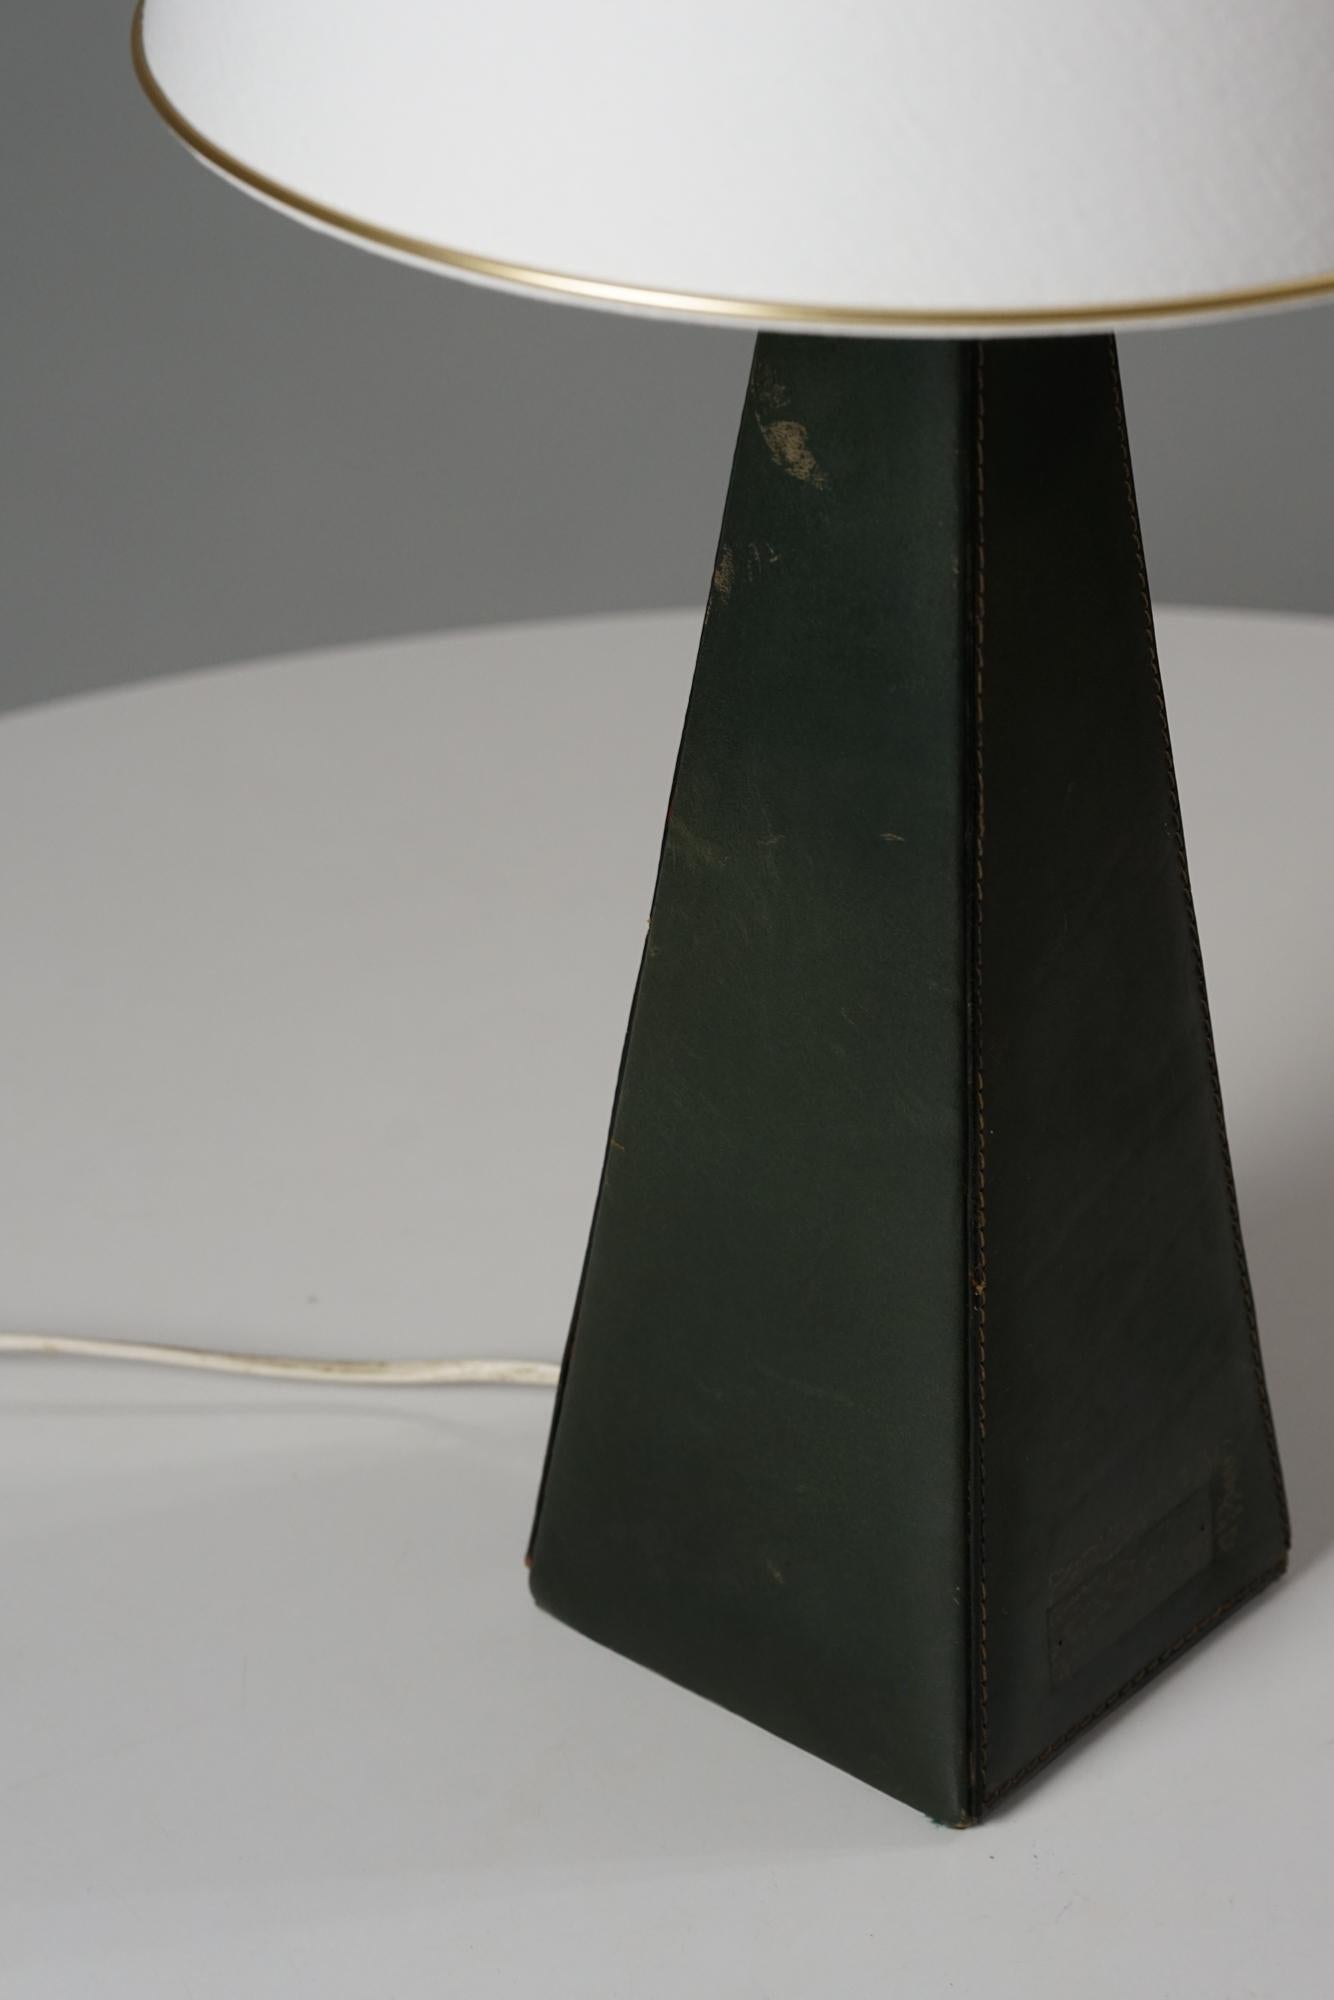 Lisa Johansson-Pape Rare Leather Table Lamp, Orno Oy, 1960s In Good Condition For Sale In Helsinki, FI